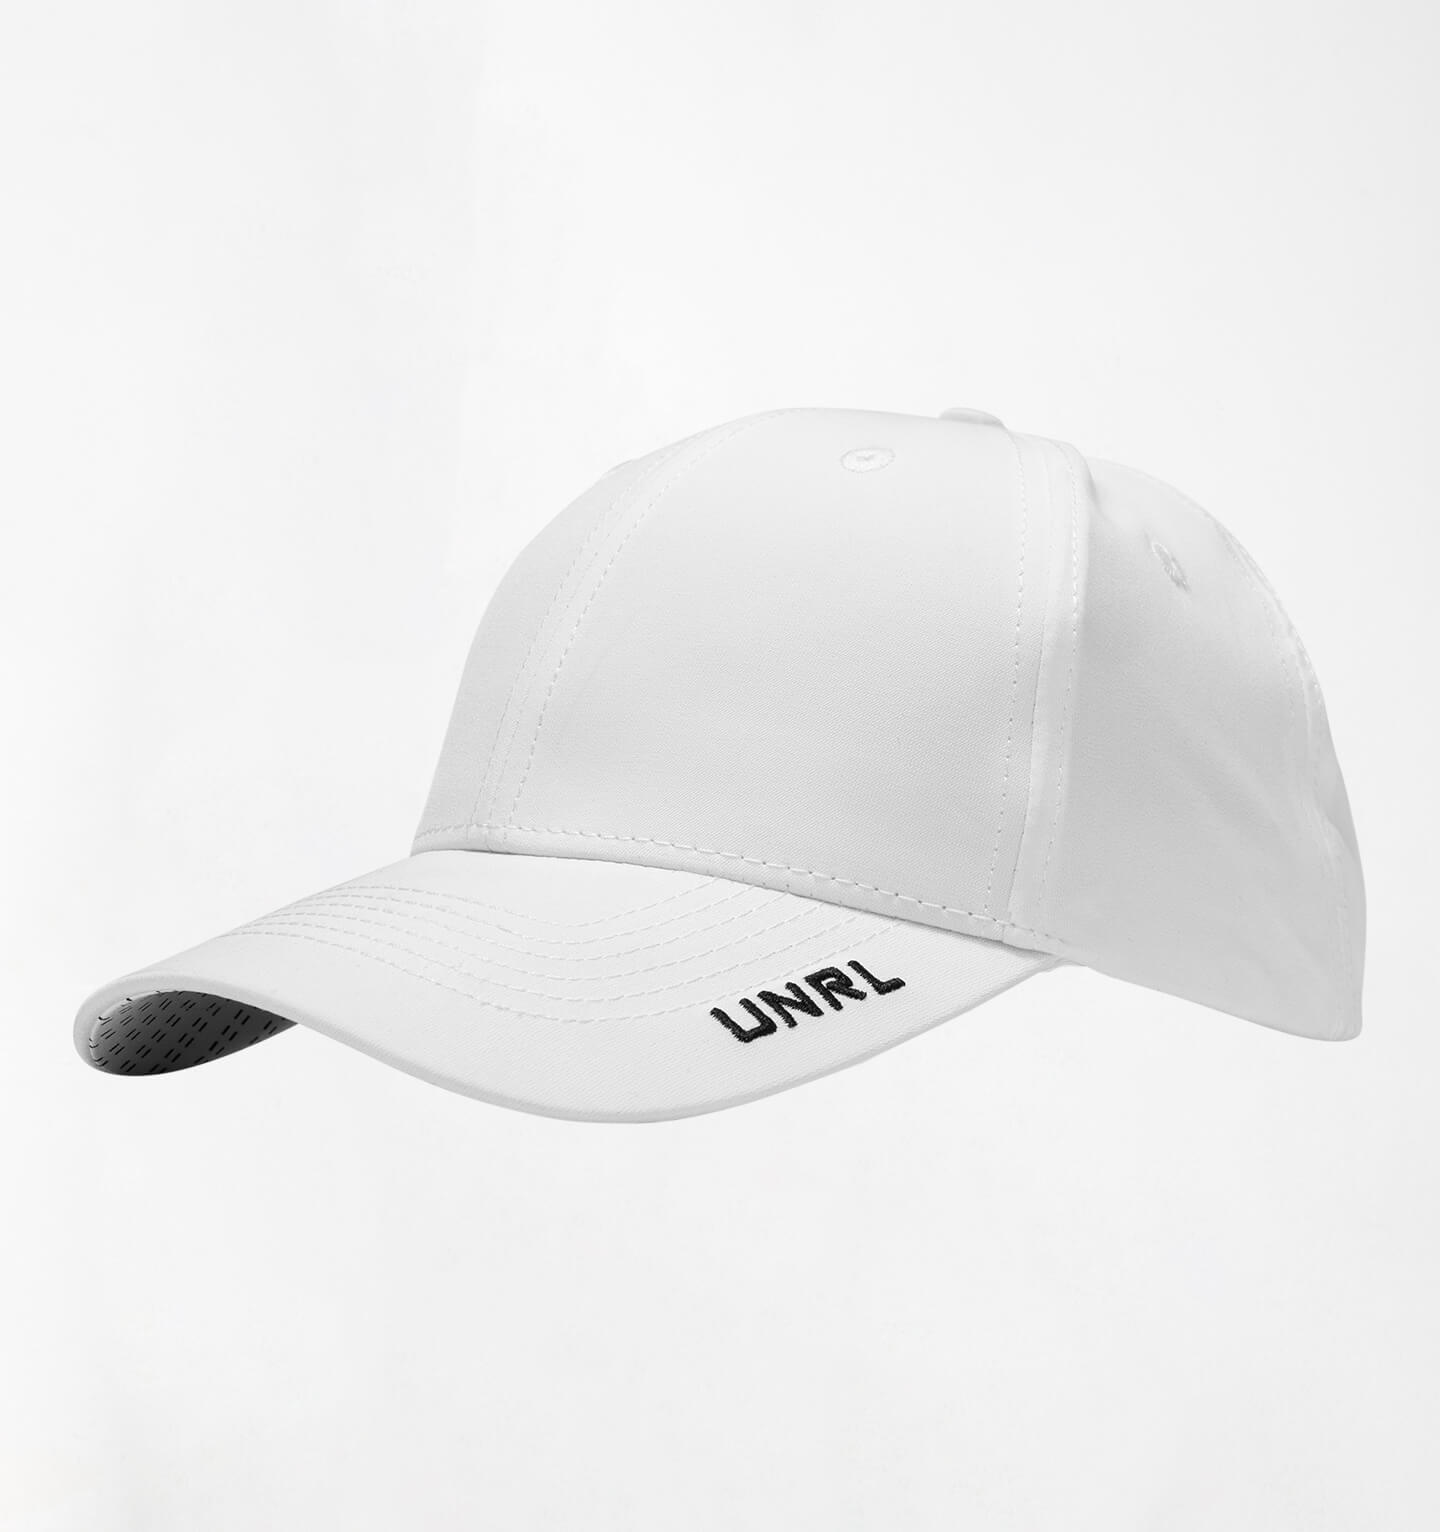 Athletic Fit Performance Strap Back